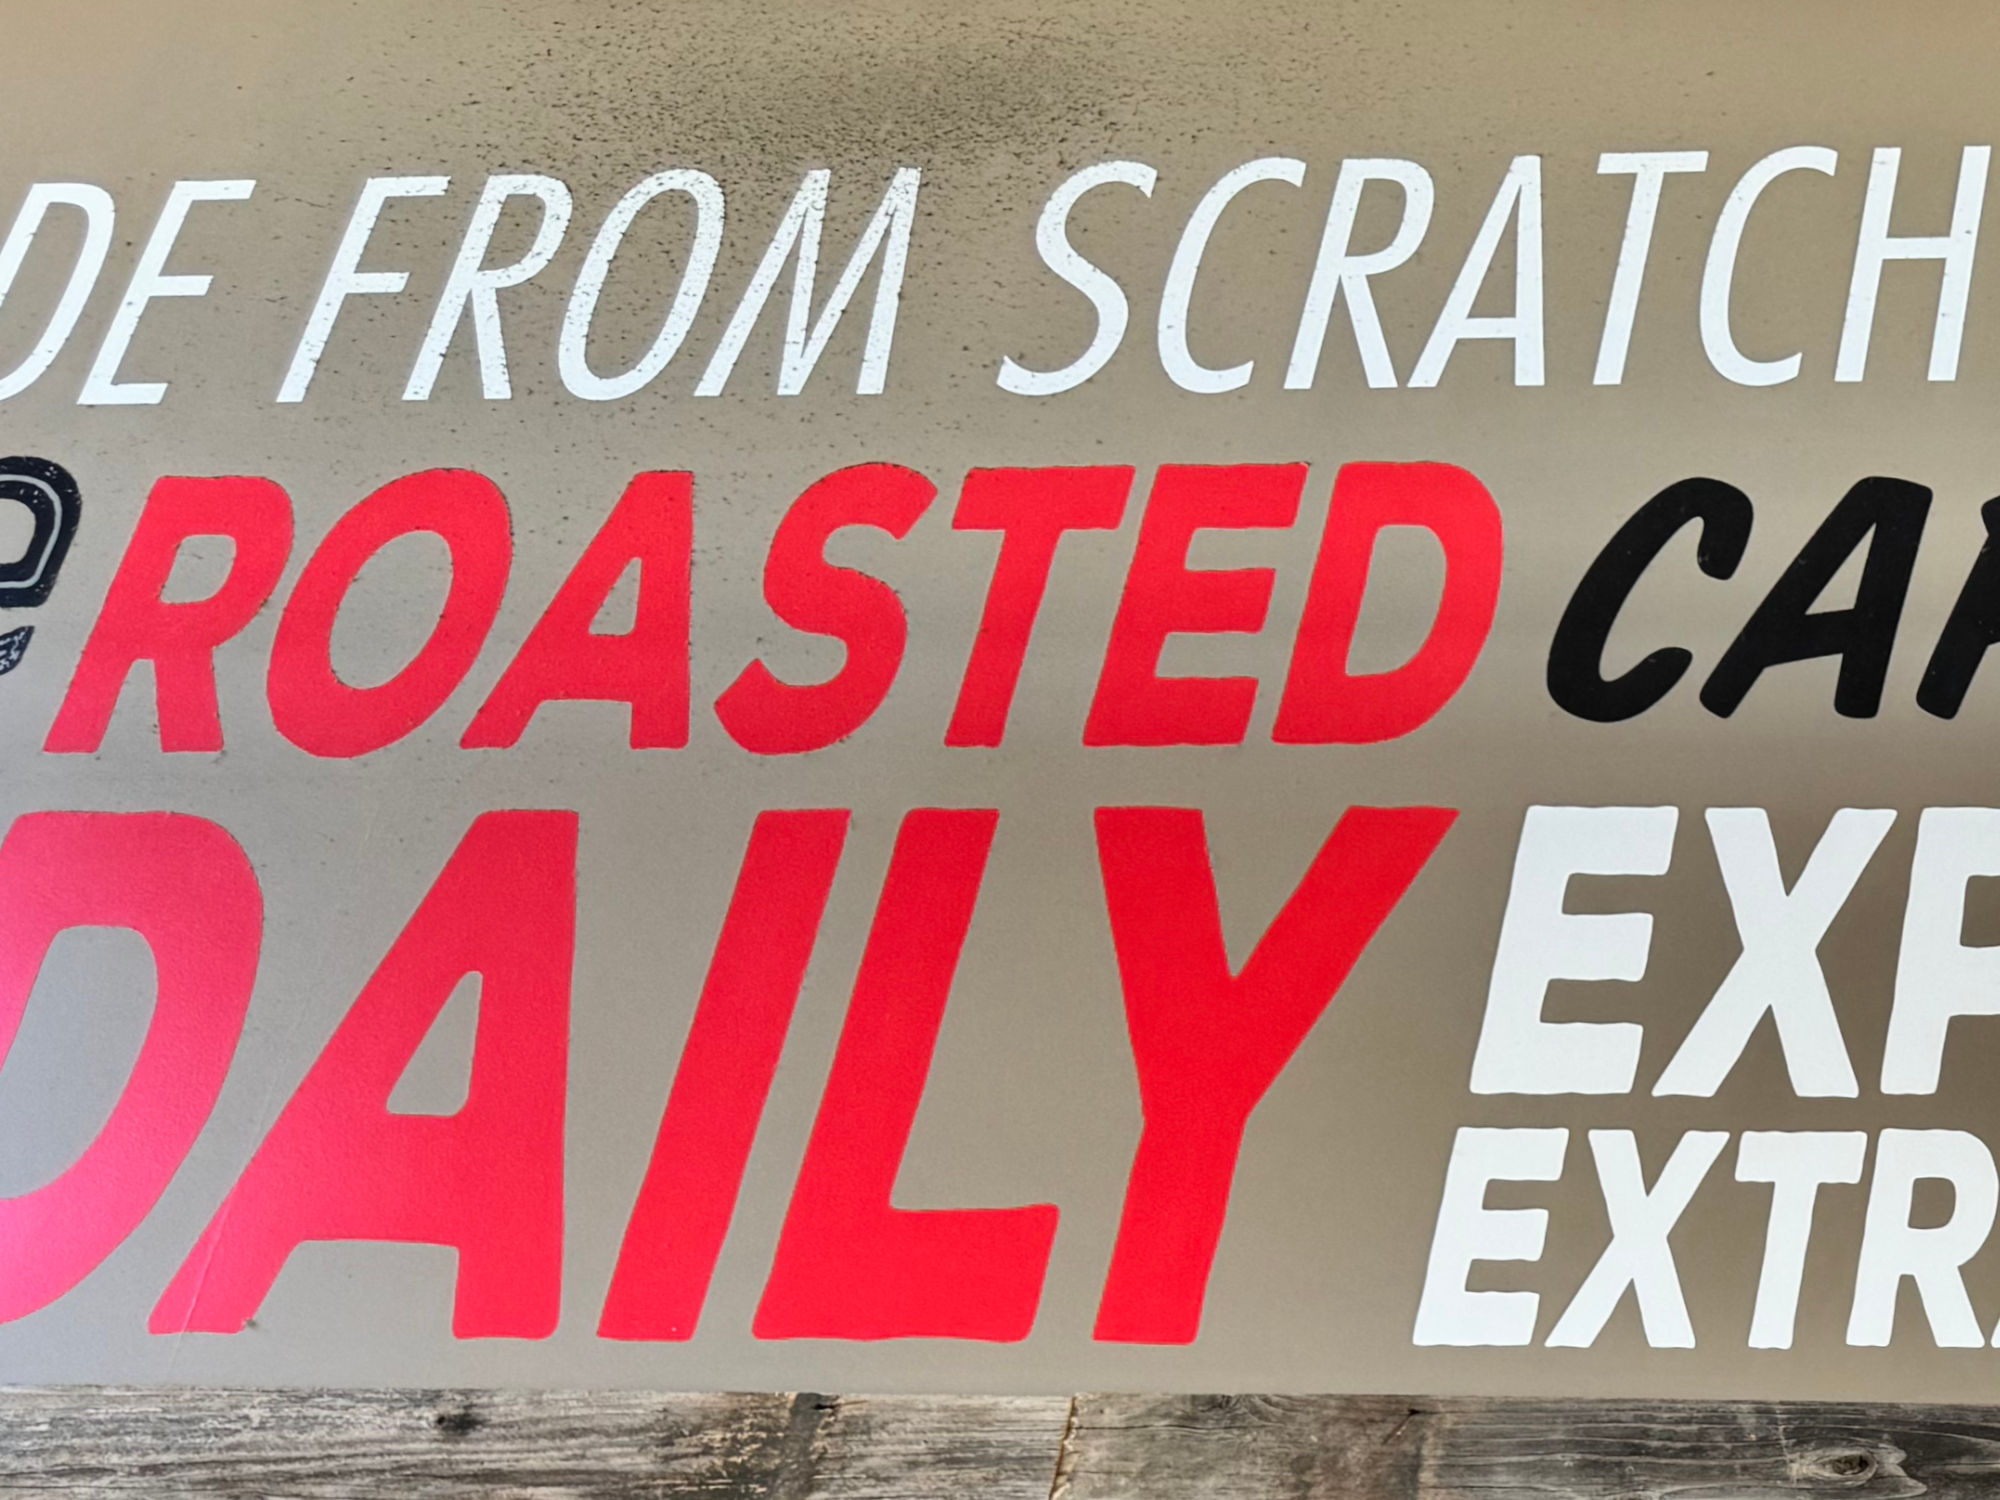 Capriotti's Roasted Daily